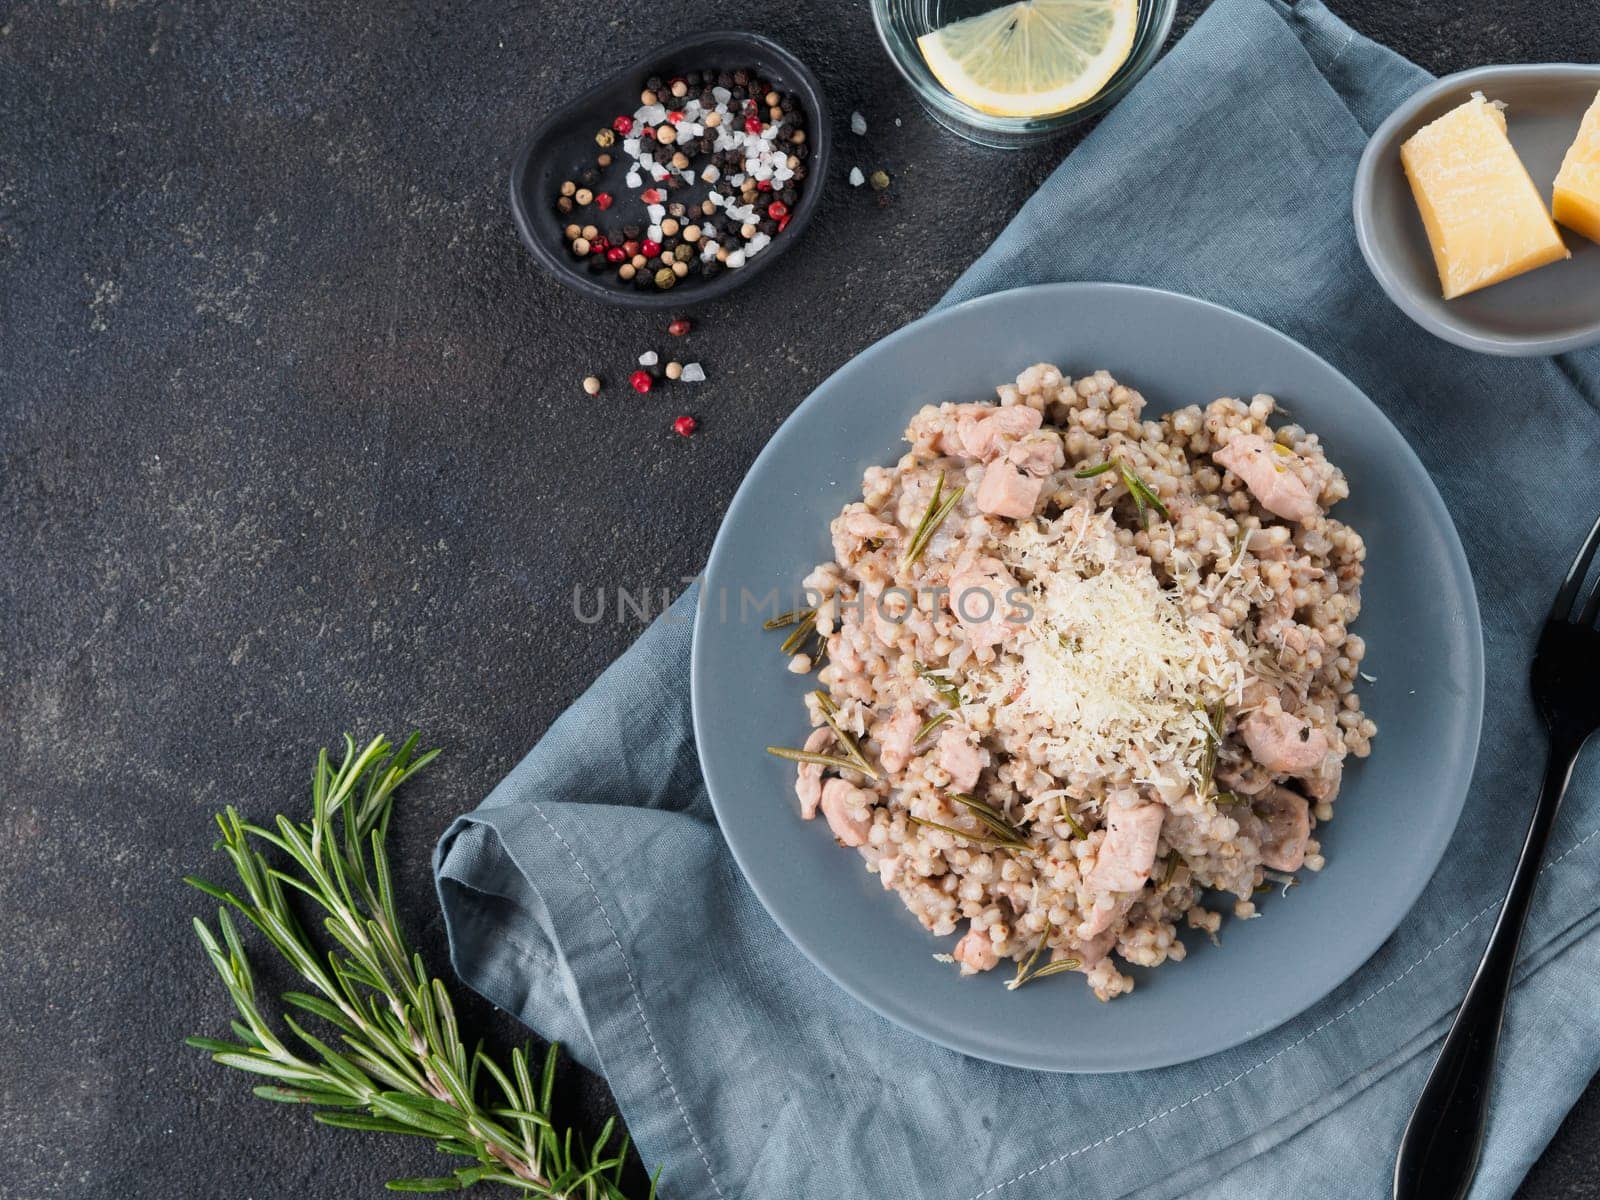 Raw buckwheat risotto with chicken meat and rosemary served parmesan cheese in gray plate on black cement background. Gluten-free and buckwheat recipe ideas. Copy space. Top view or flat-lay.